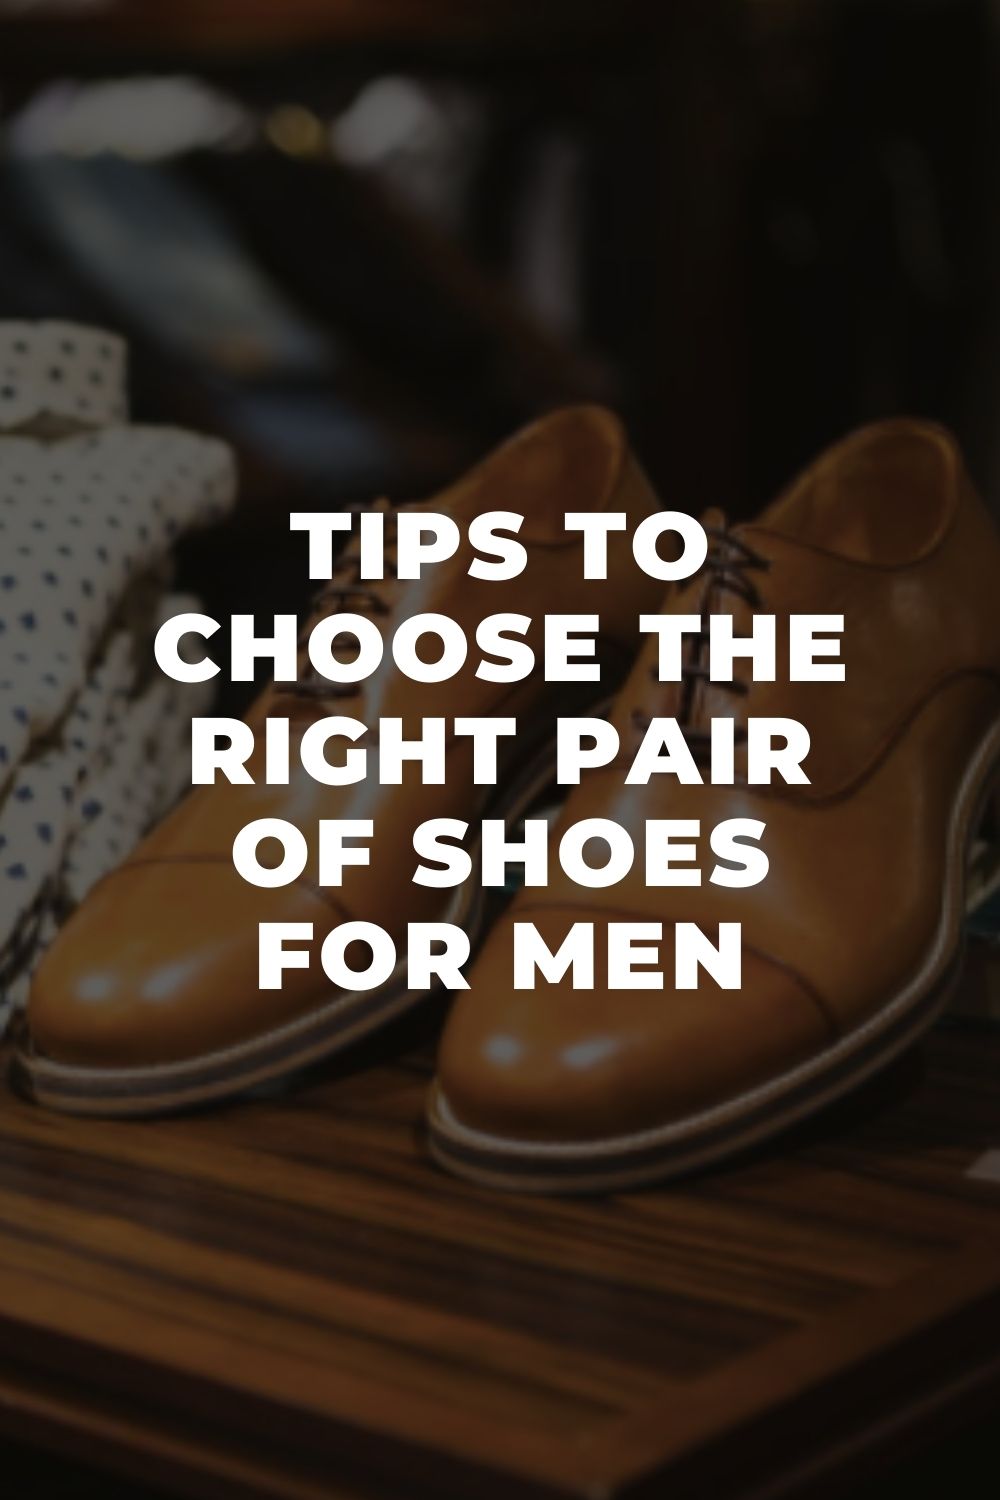 Tips to Choose The Right Pair of Shoes For Men